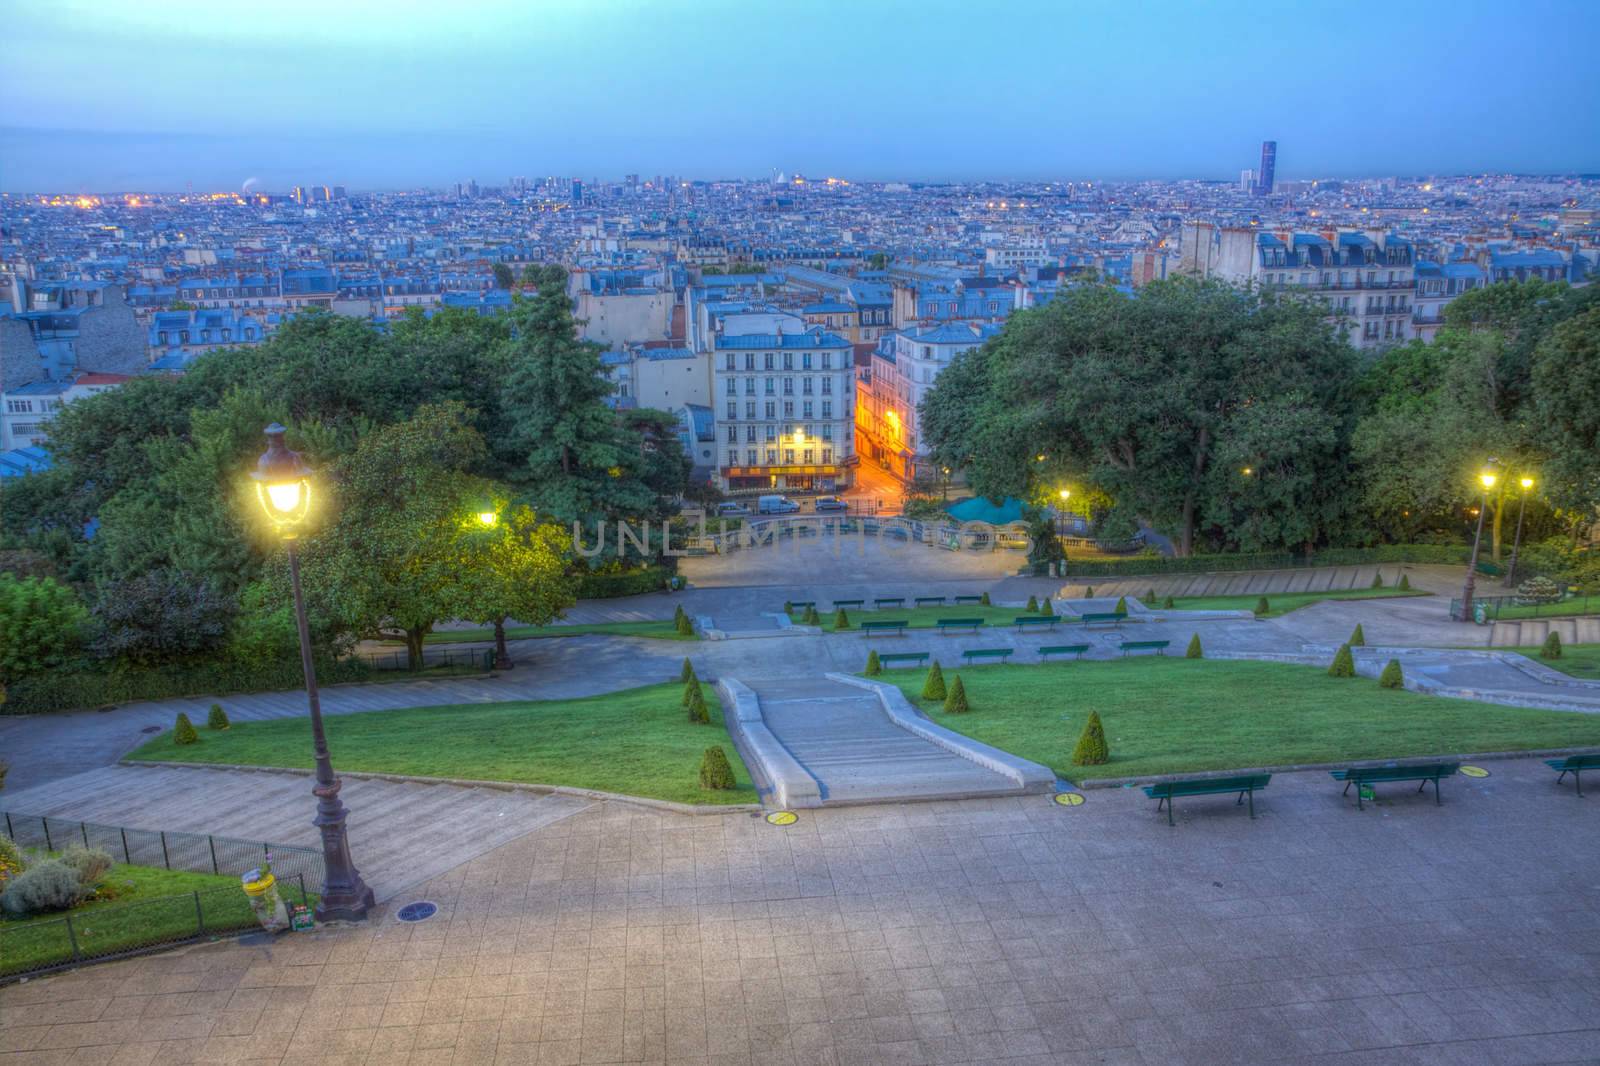 Paris from Montmartre by Harvepino